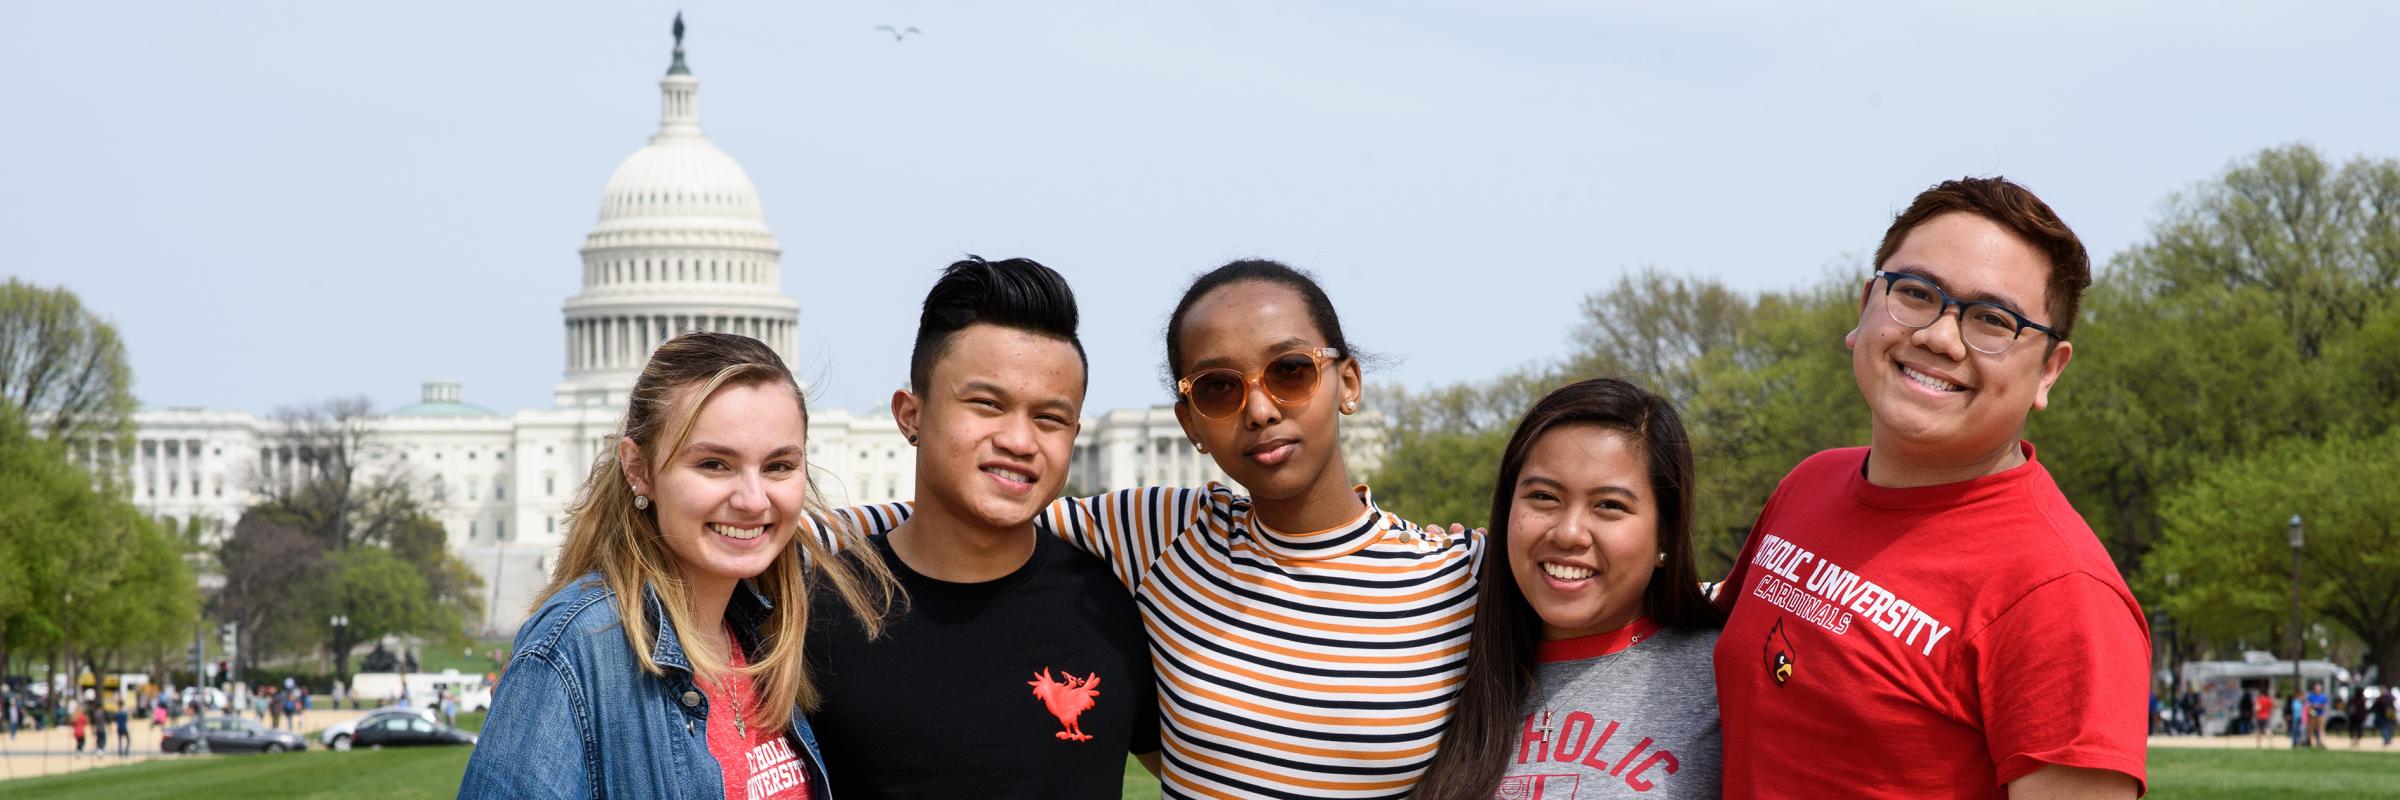 Students on the National Mall